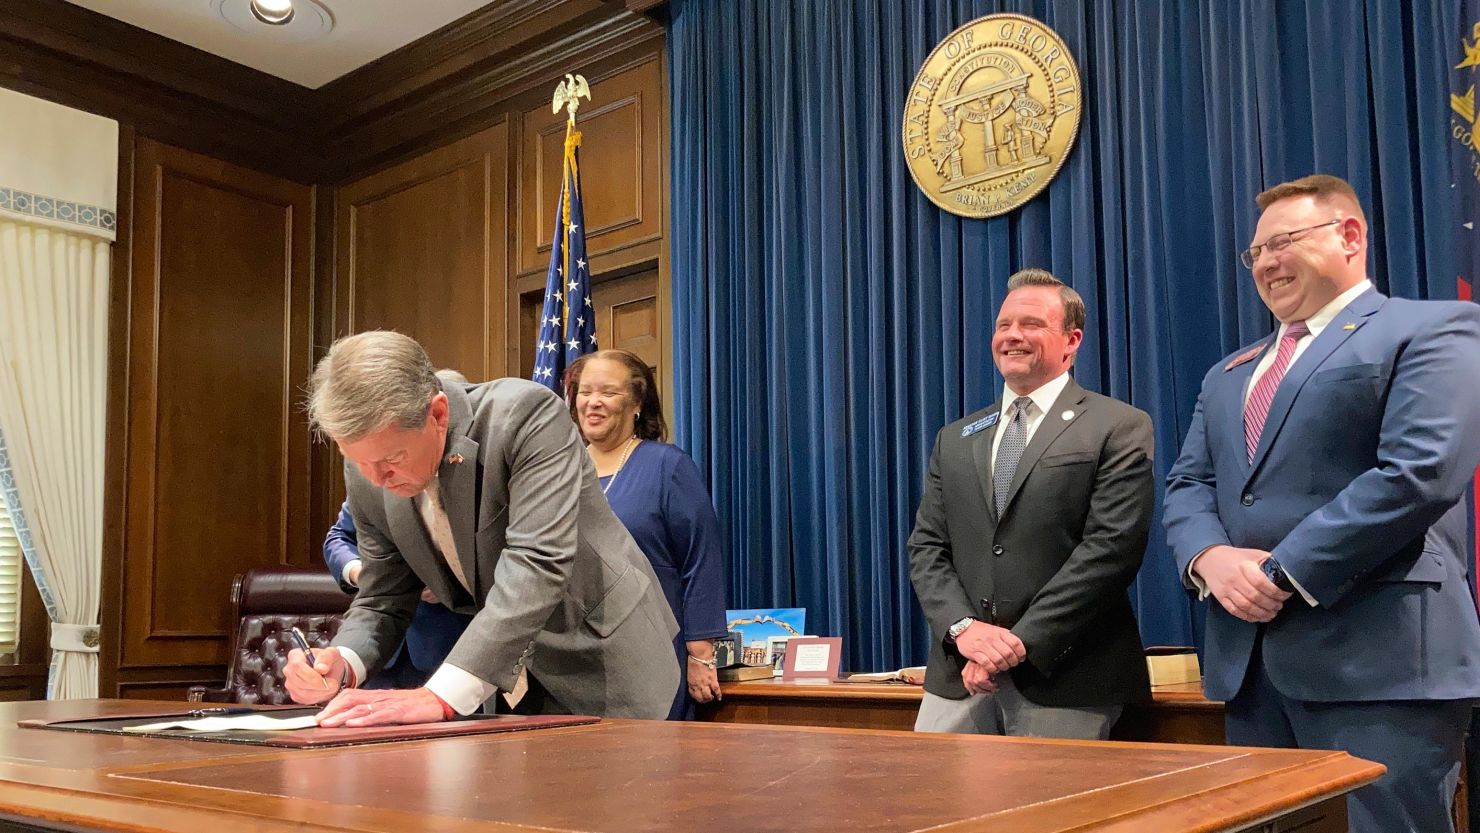 Georgia Gov. Brian Kemp signs a bill at the state Capitol in Atlanta on March 23, 2022, that will give income tax refunds of more than $1.1 billion to some Georgians.